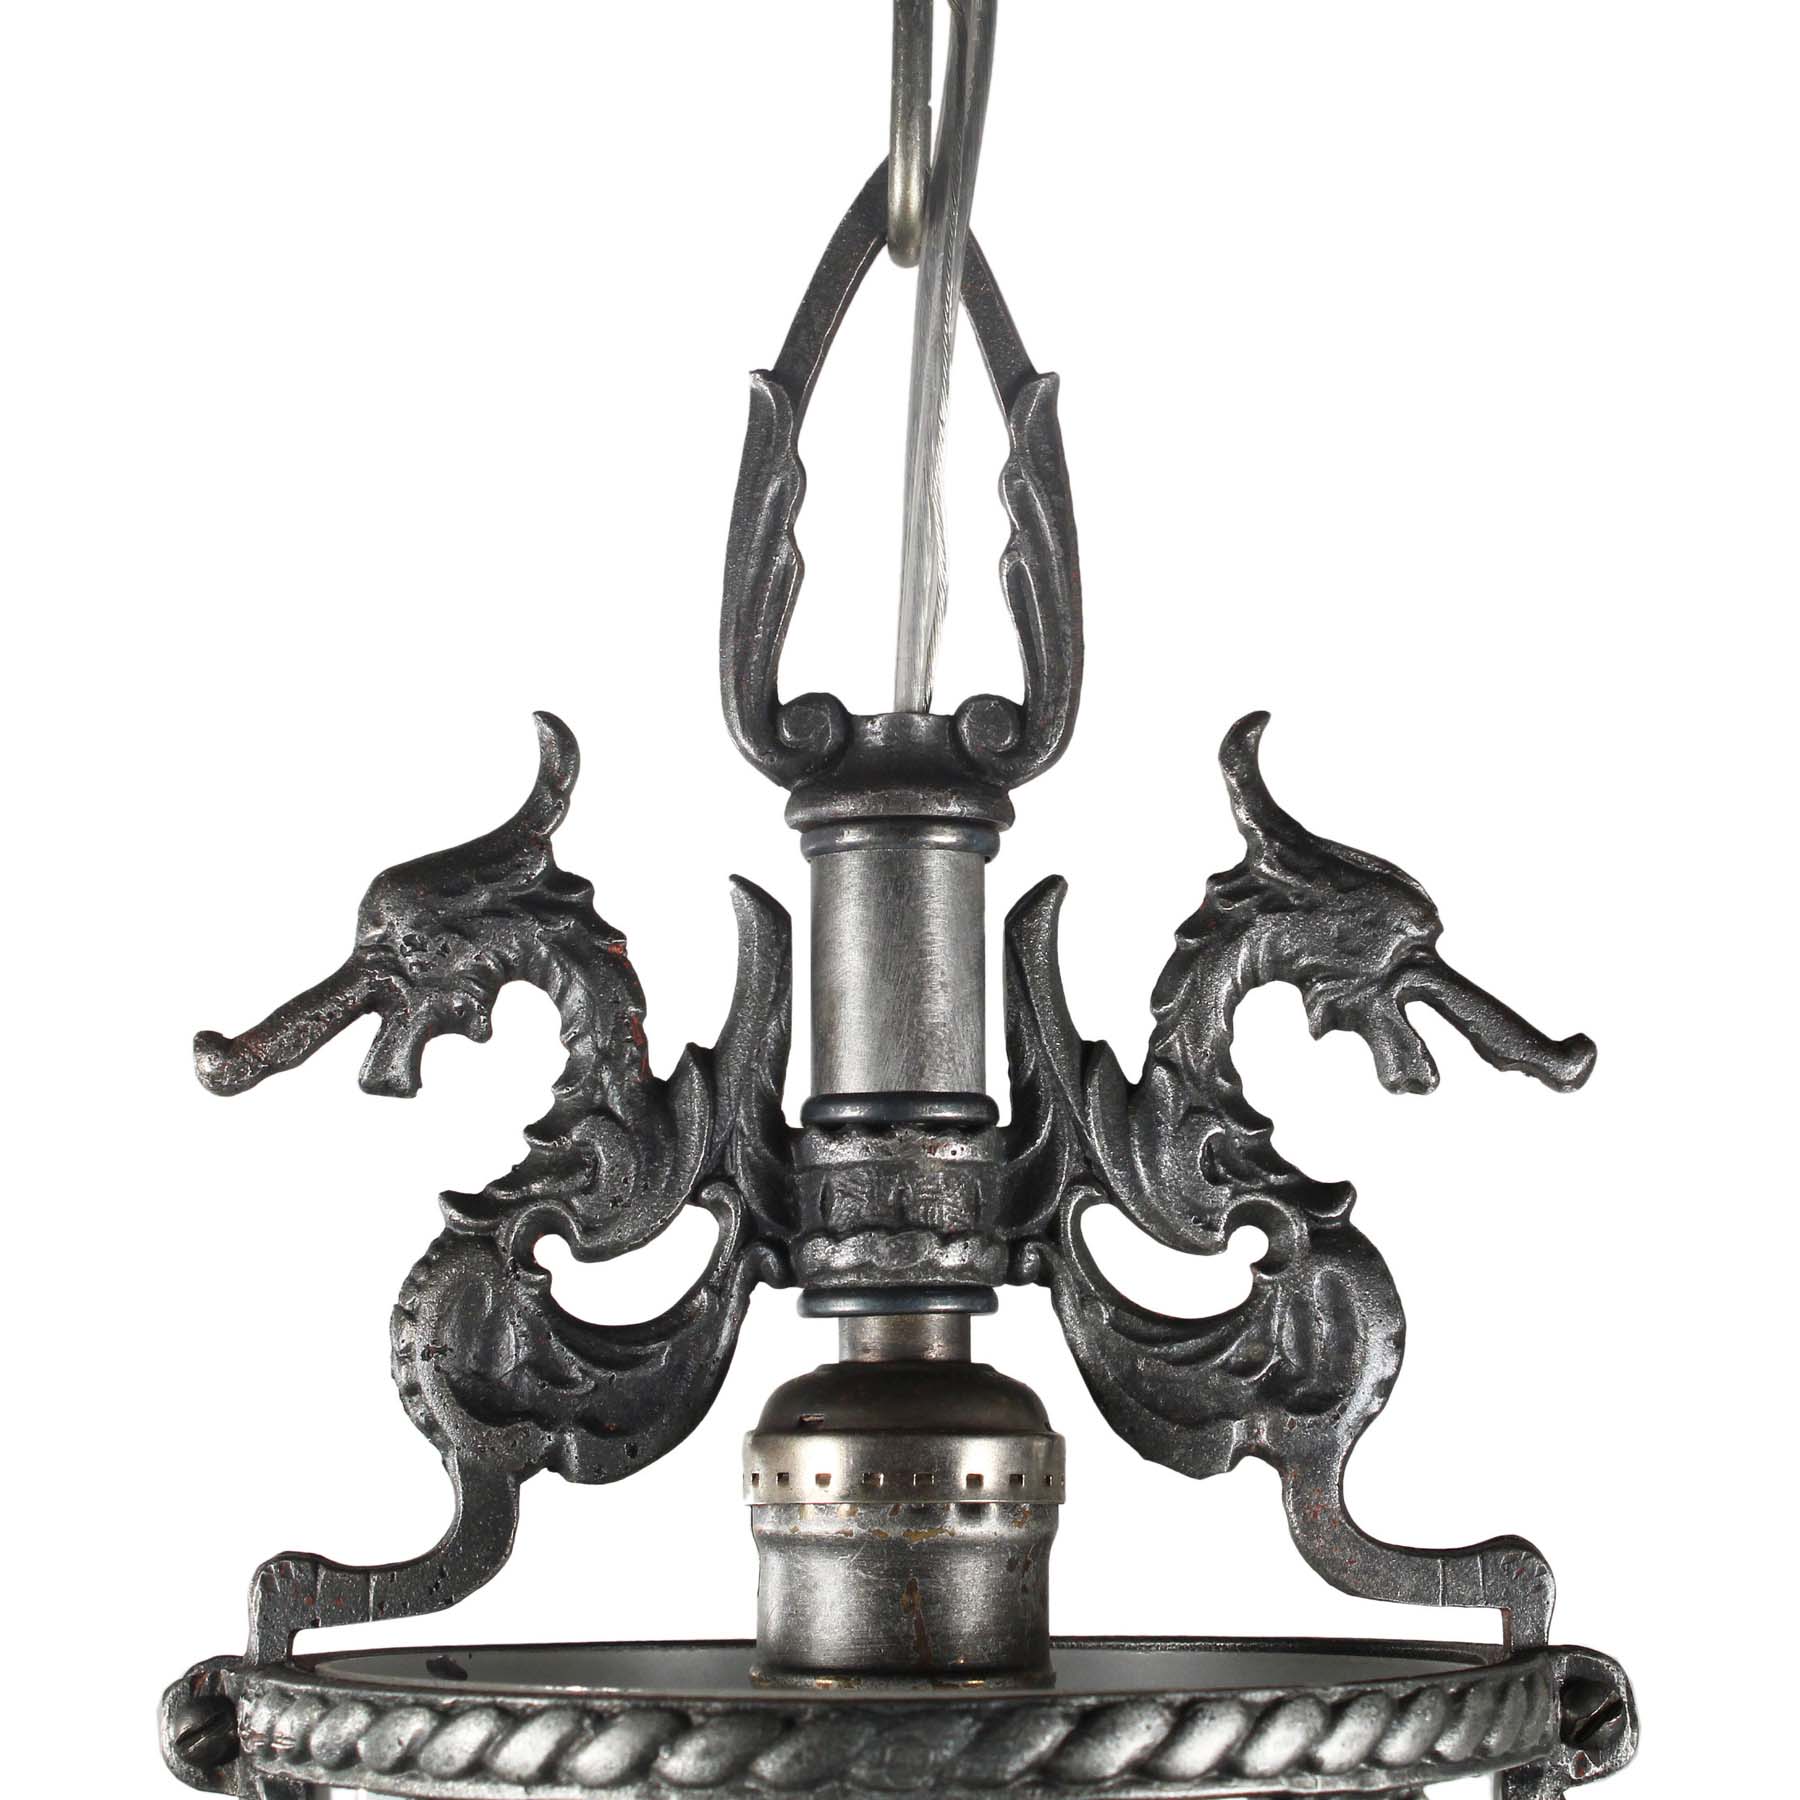 SOLD Unusual Antique Figural Pendant Light with Shields & Dragons-67388